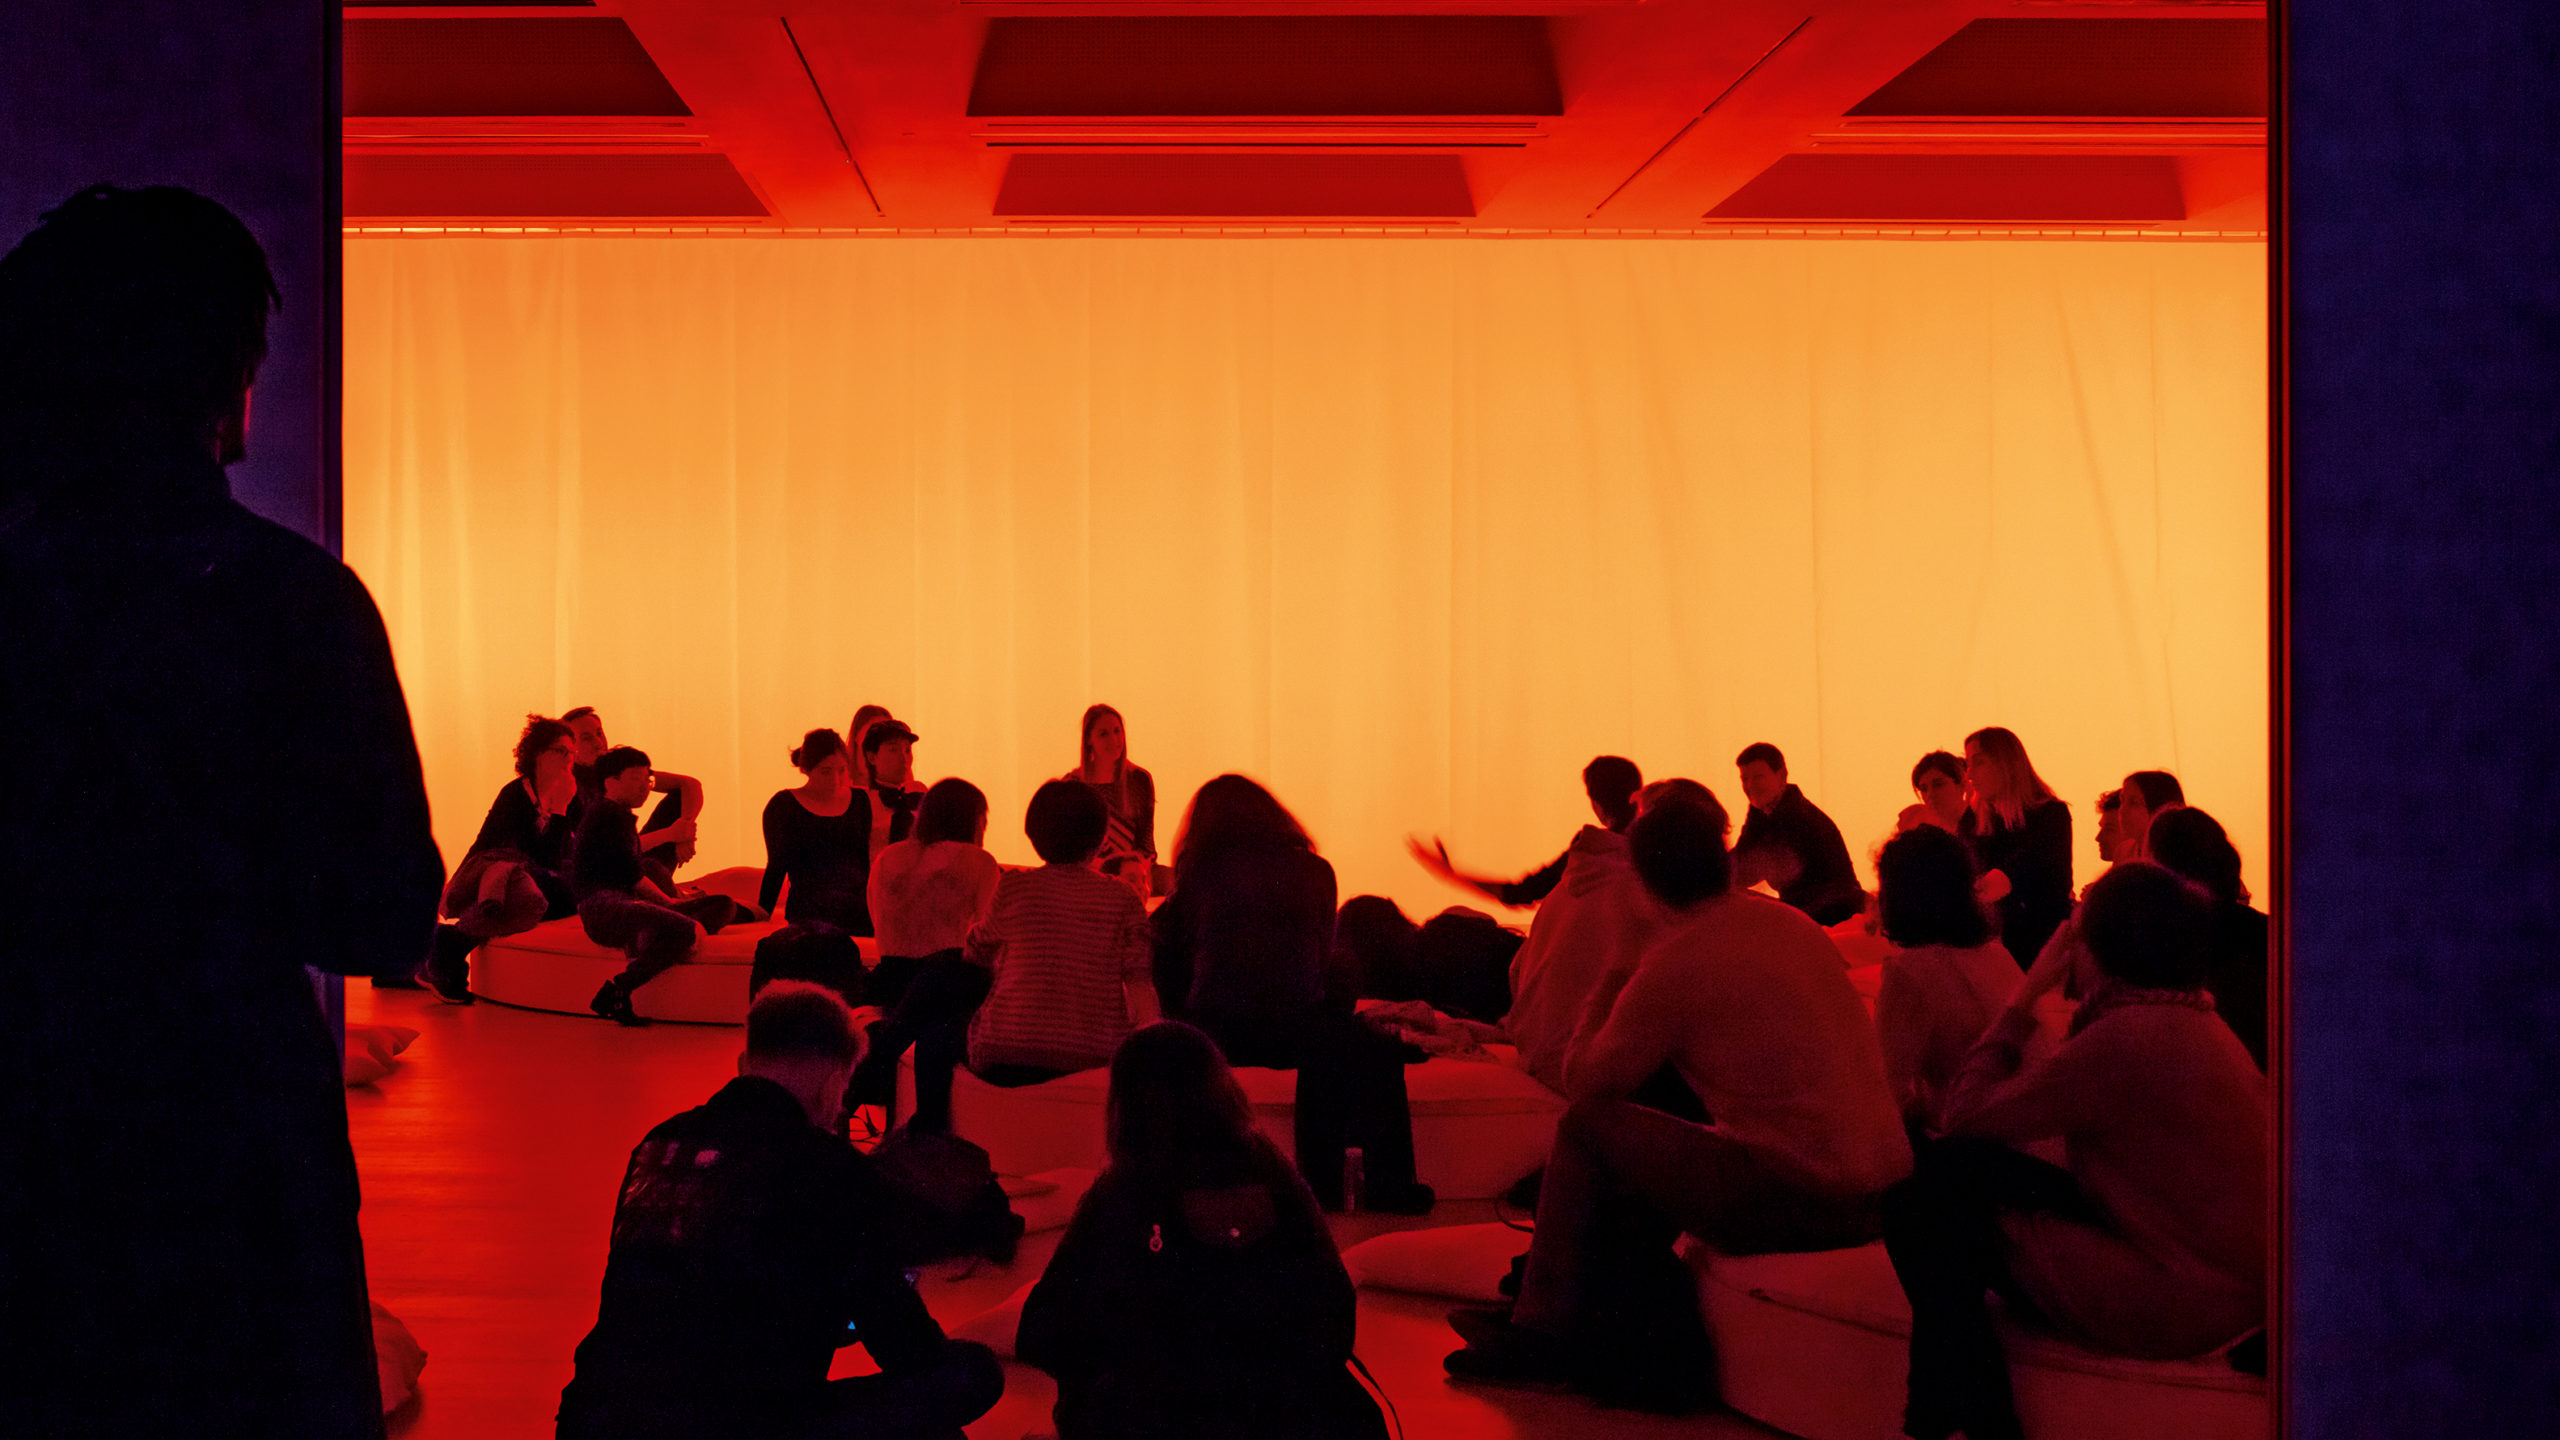 group of people sitting on the floor of an interior space bathed in orange light